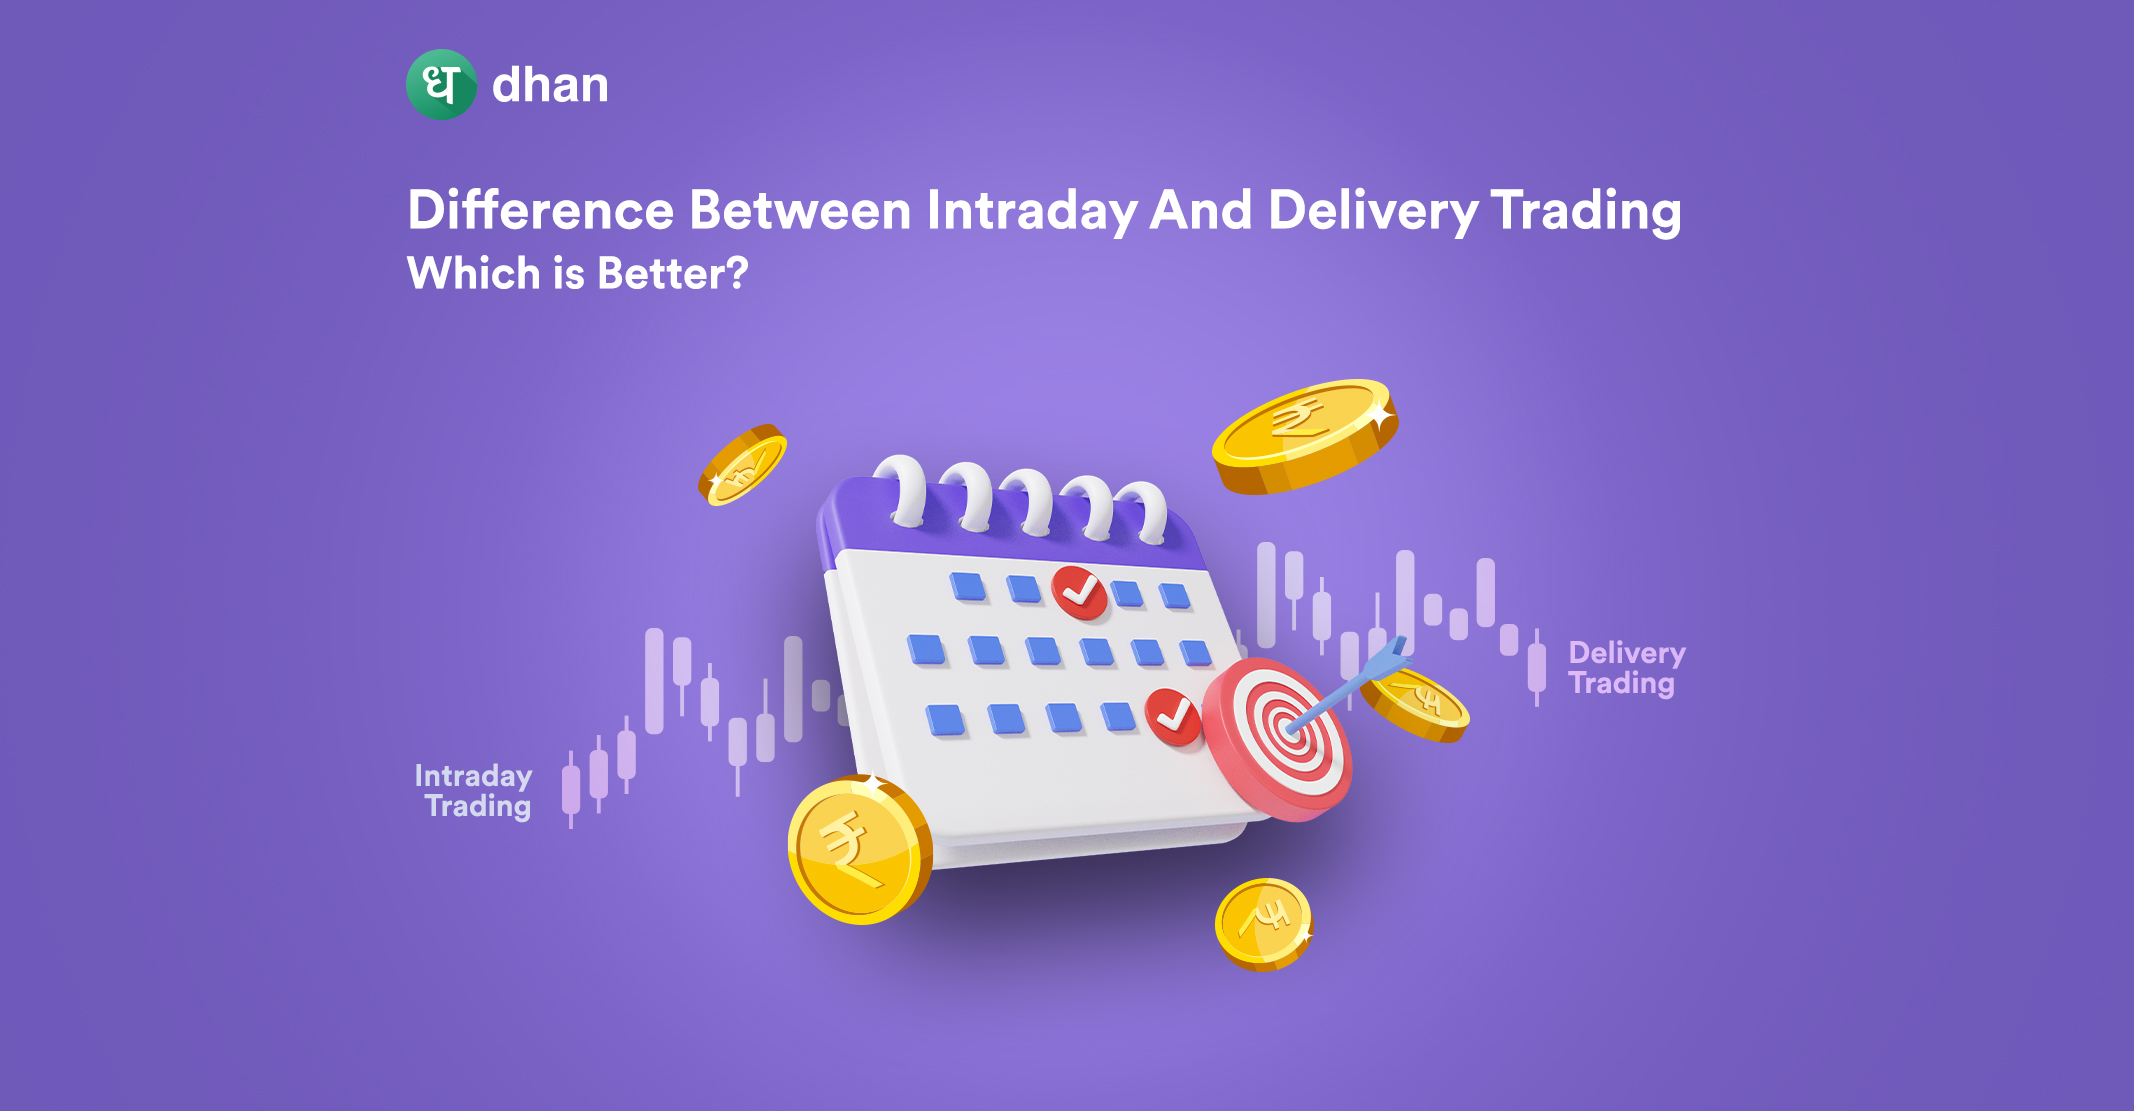 Difference Between Intraday and Delivery - Which is Better